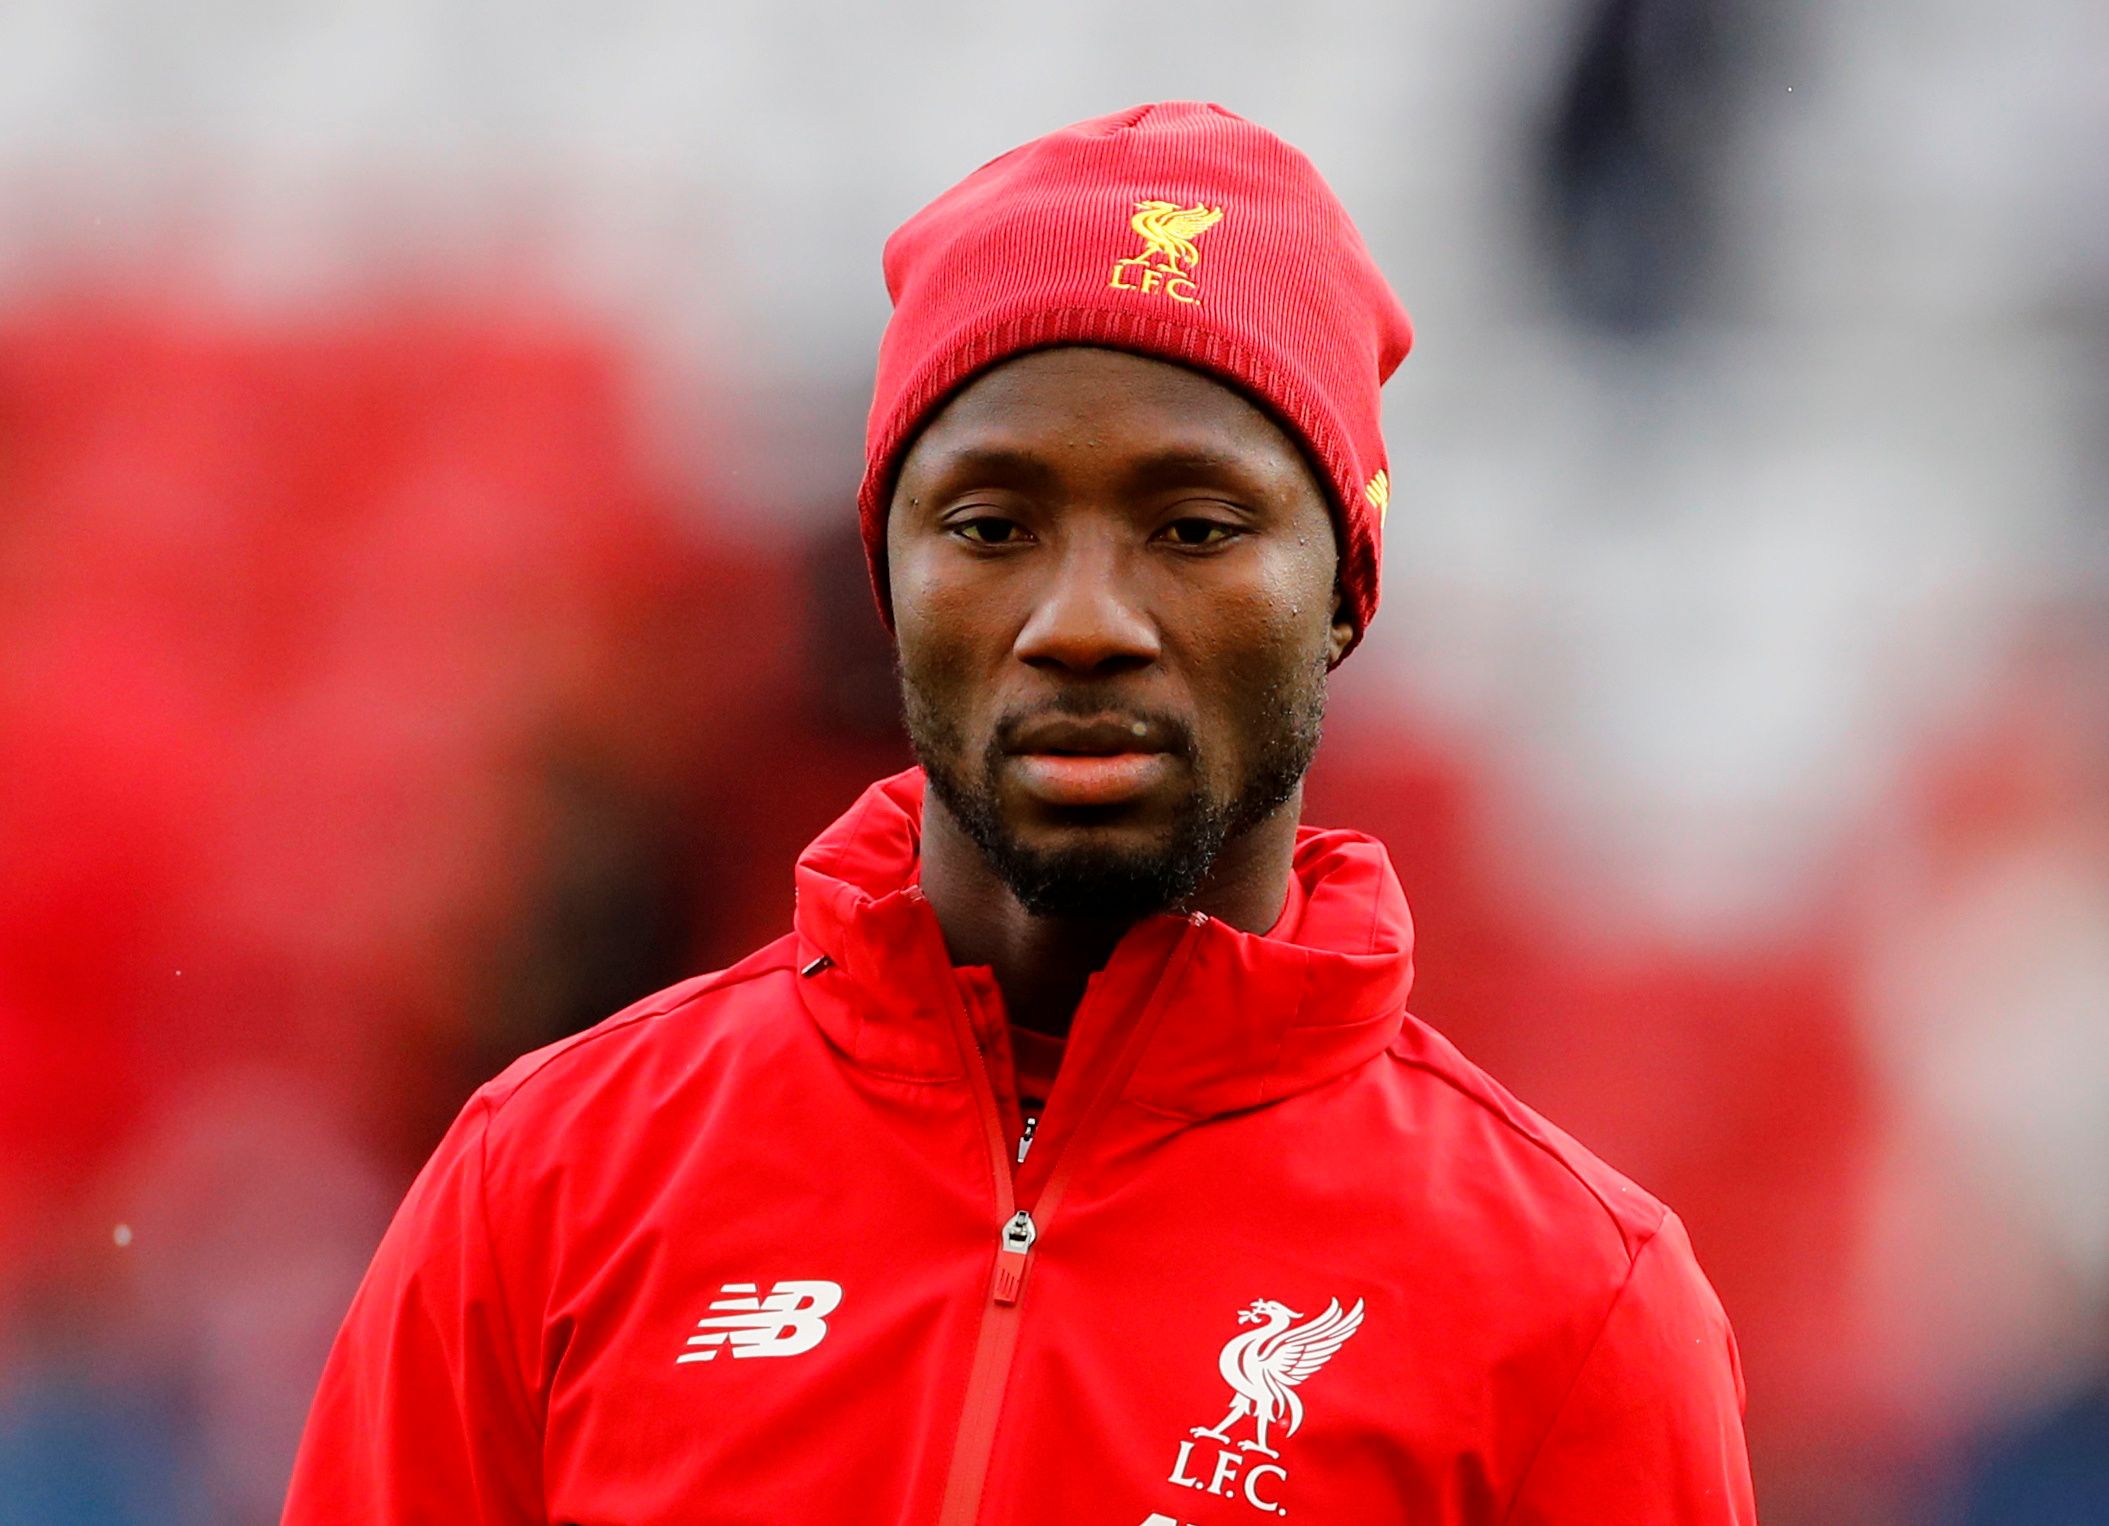 Soccer Football - Premier League - Liverpool v Watford - Anfield, Liverpool, Britain - December 14, 2019  Liverpool's Naby Keita during the warm up before the match  REUTERS/Phil Noble  EDITORIAL USE ONLY. No use with unauthorized audio, video, data, fixture lists, club/league logos or 